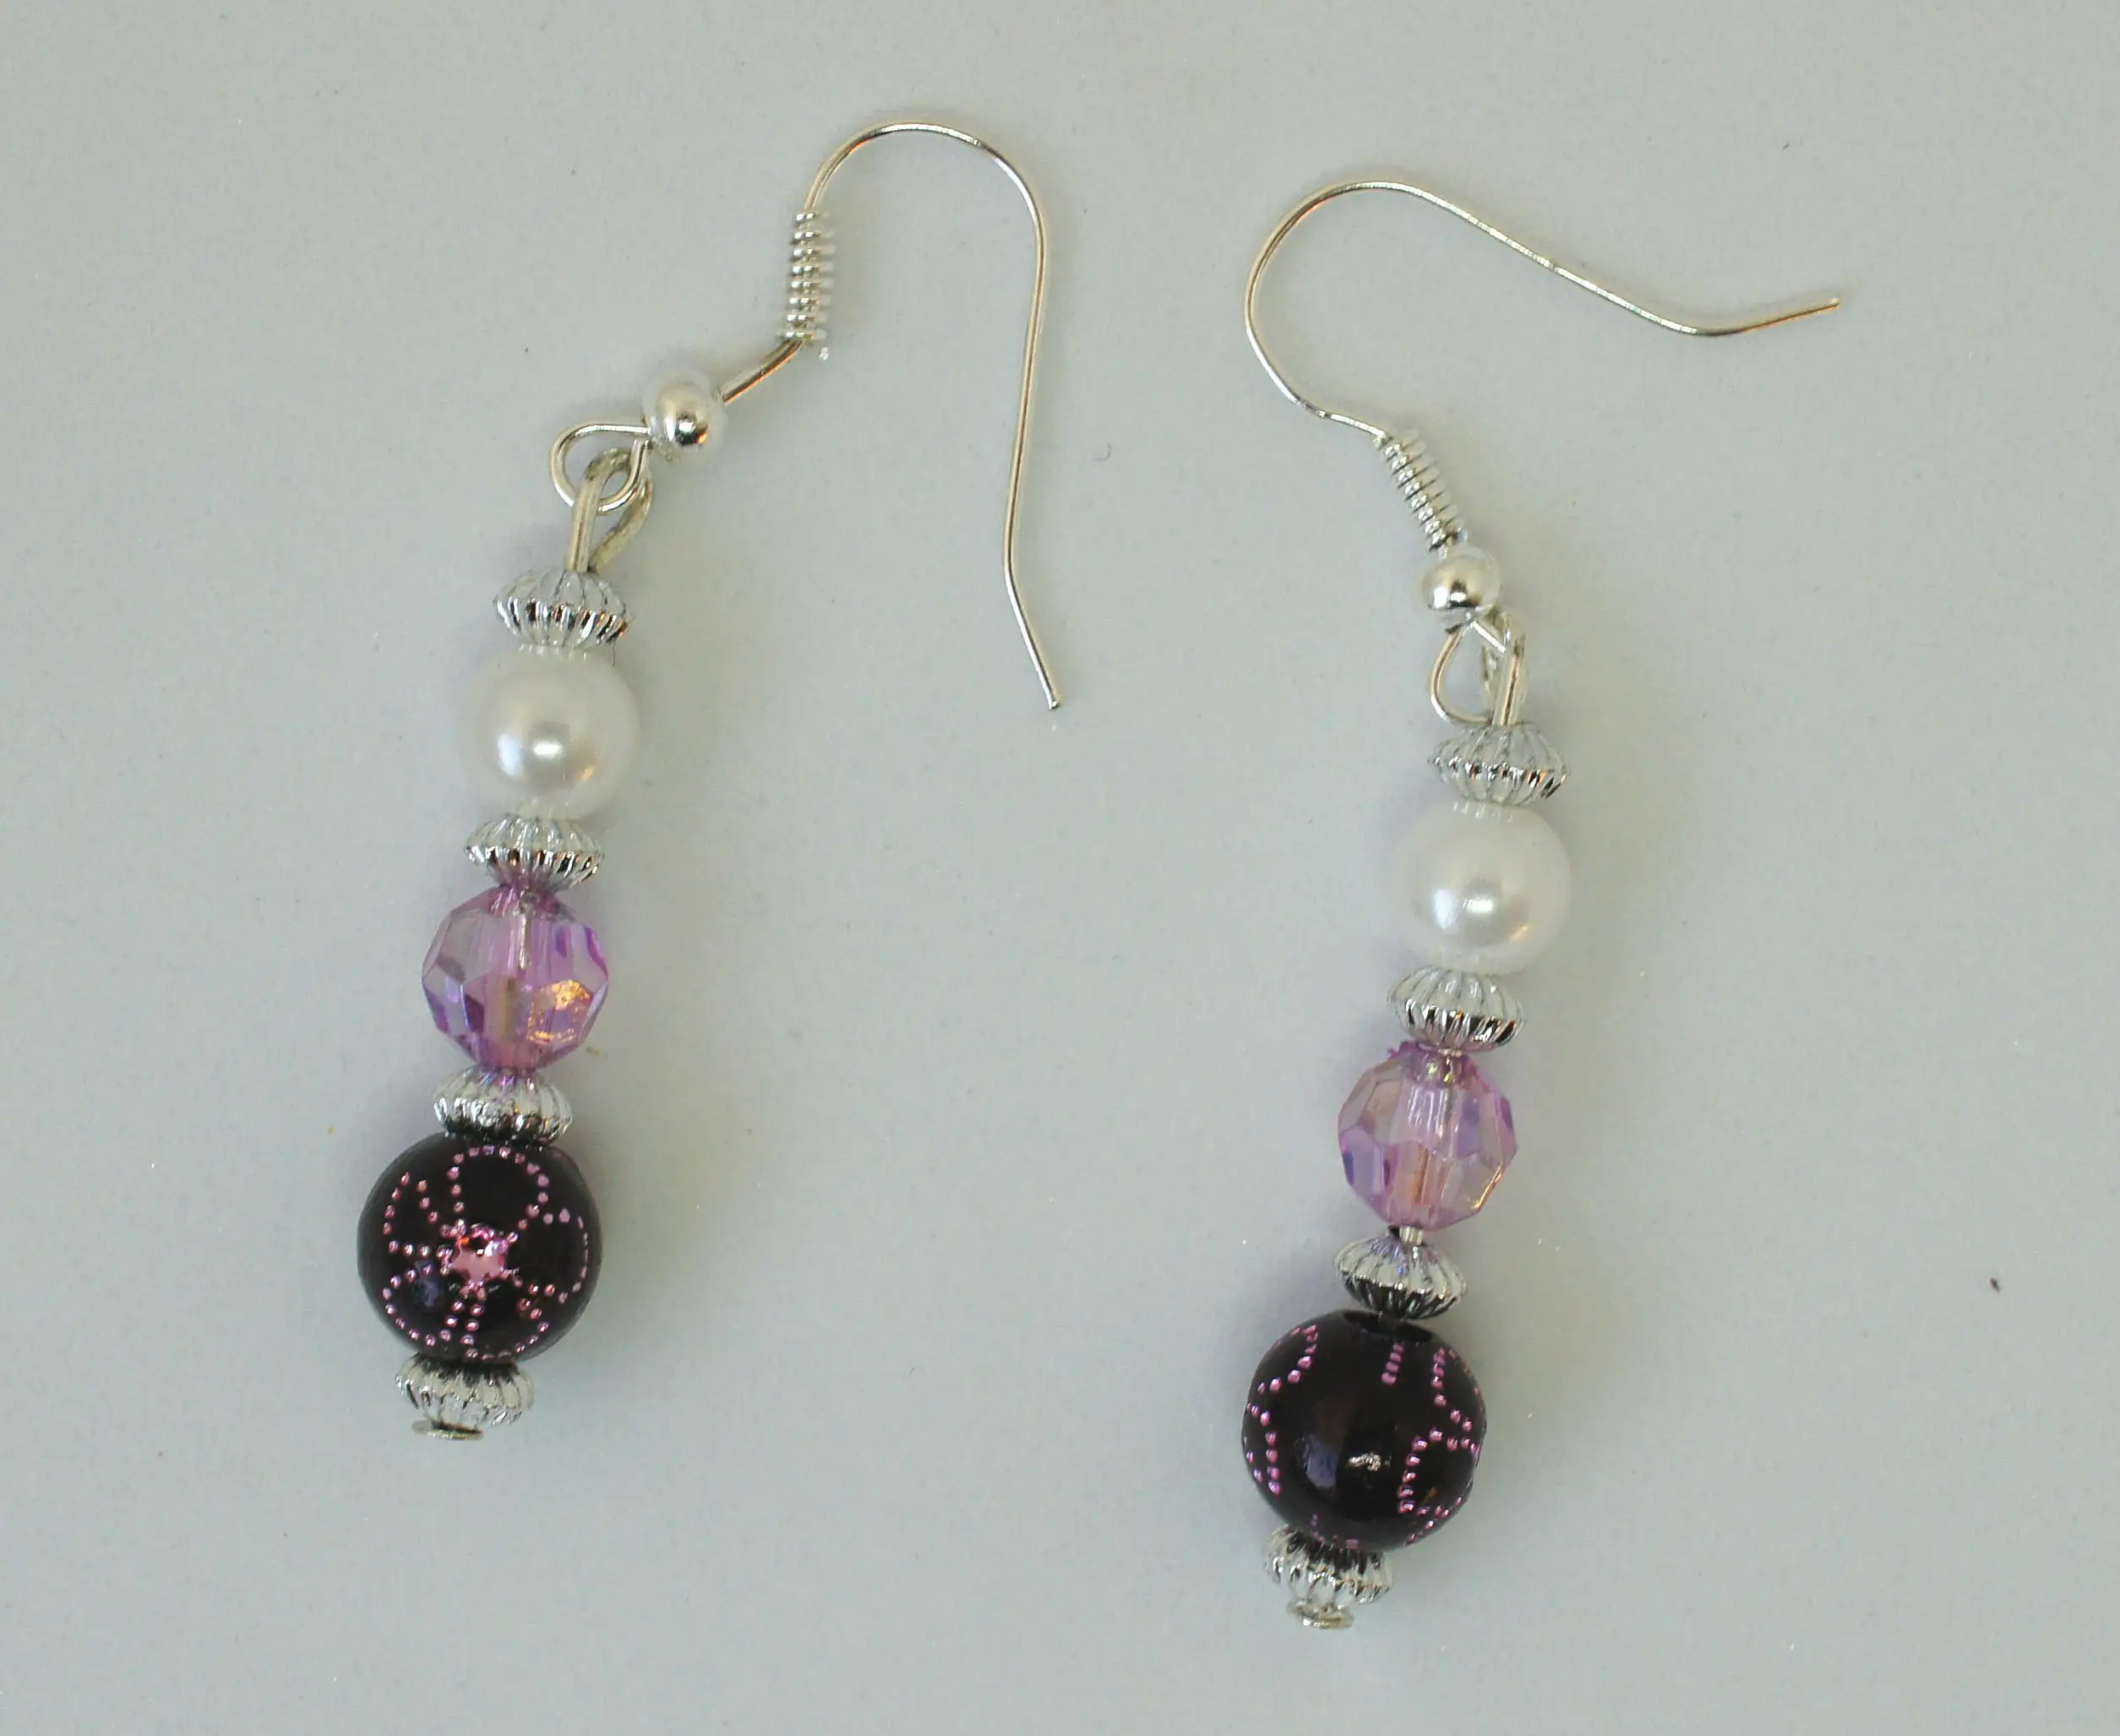 Completed earrings